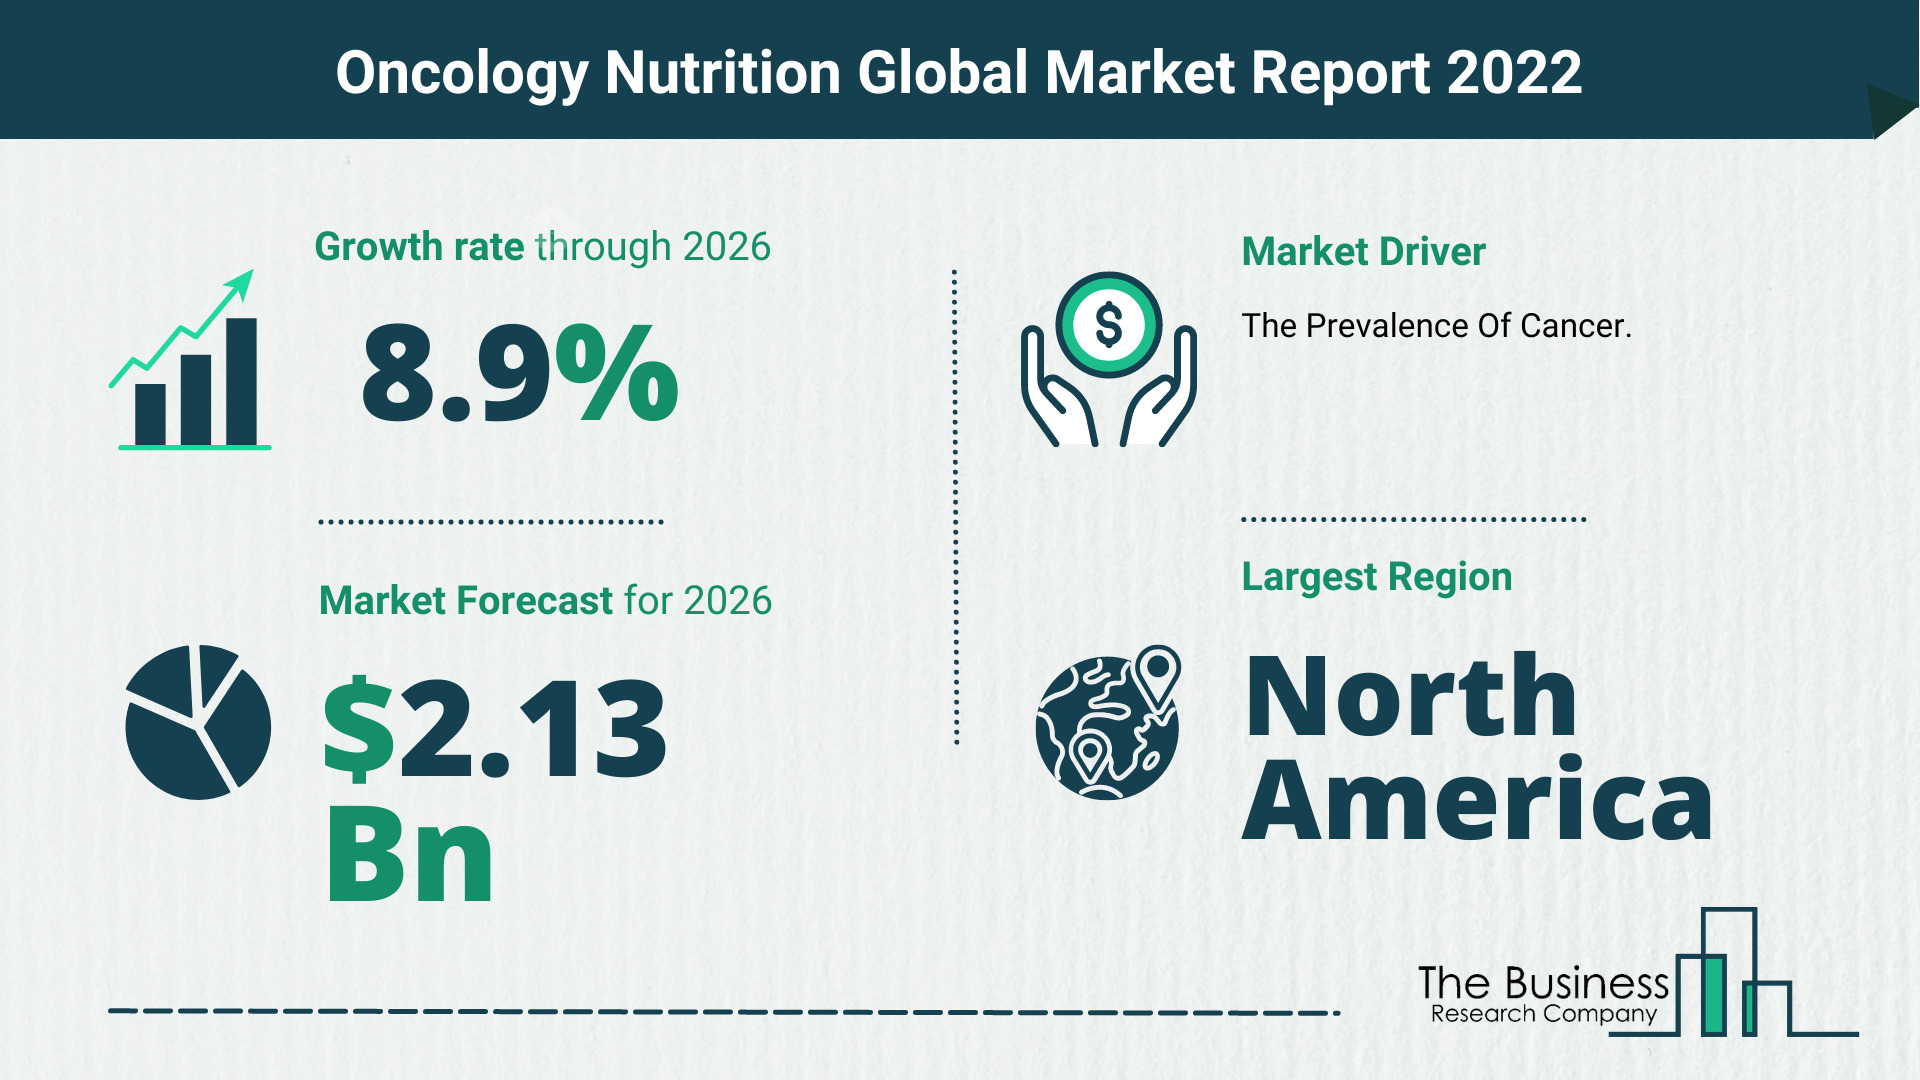 Global Oncology Nutrition Market 2022 – Market Opportunities And Strategies